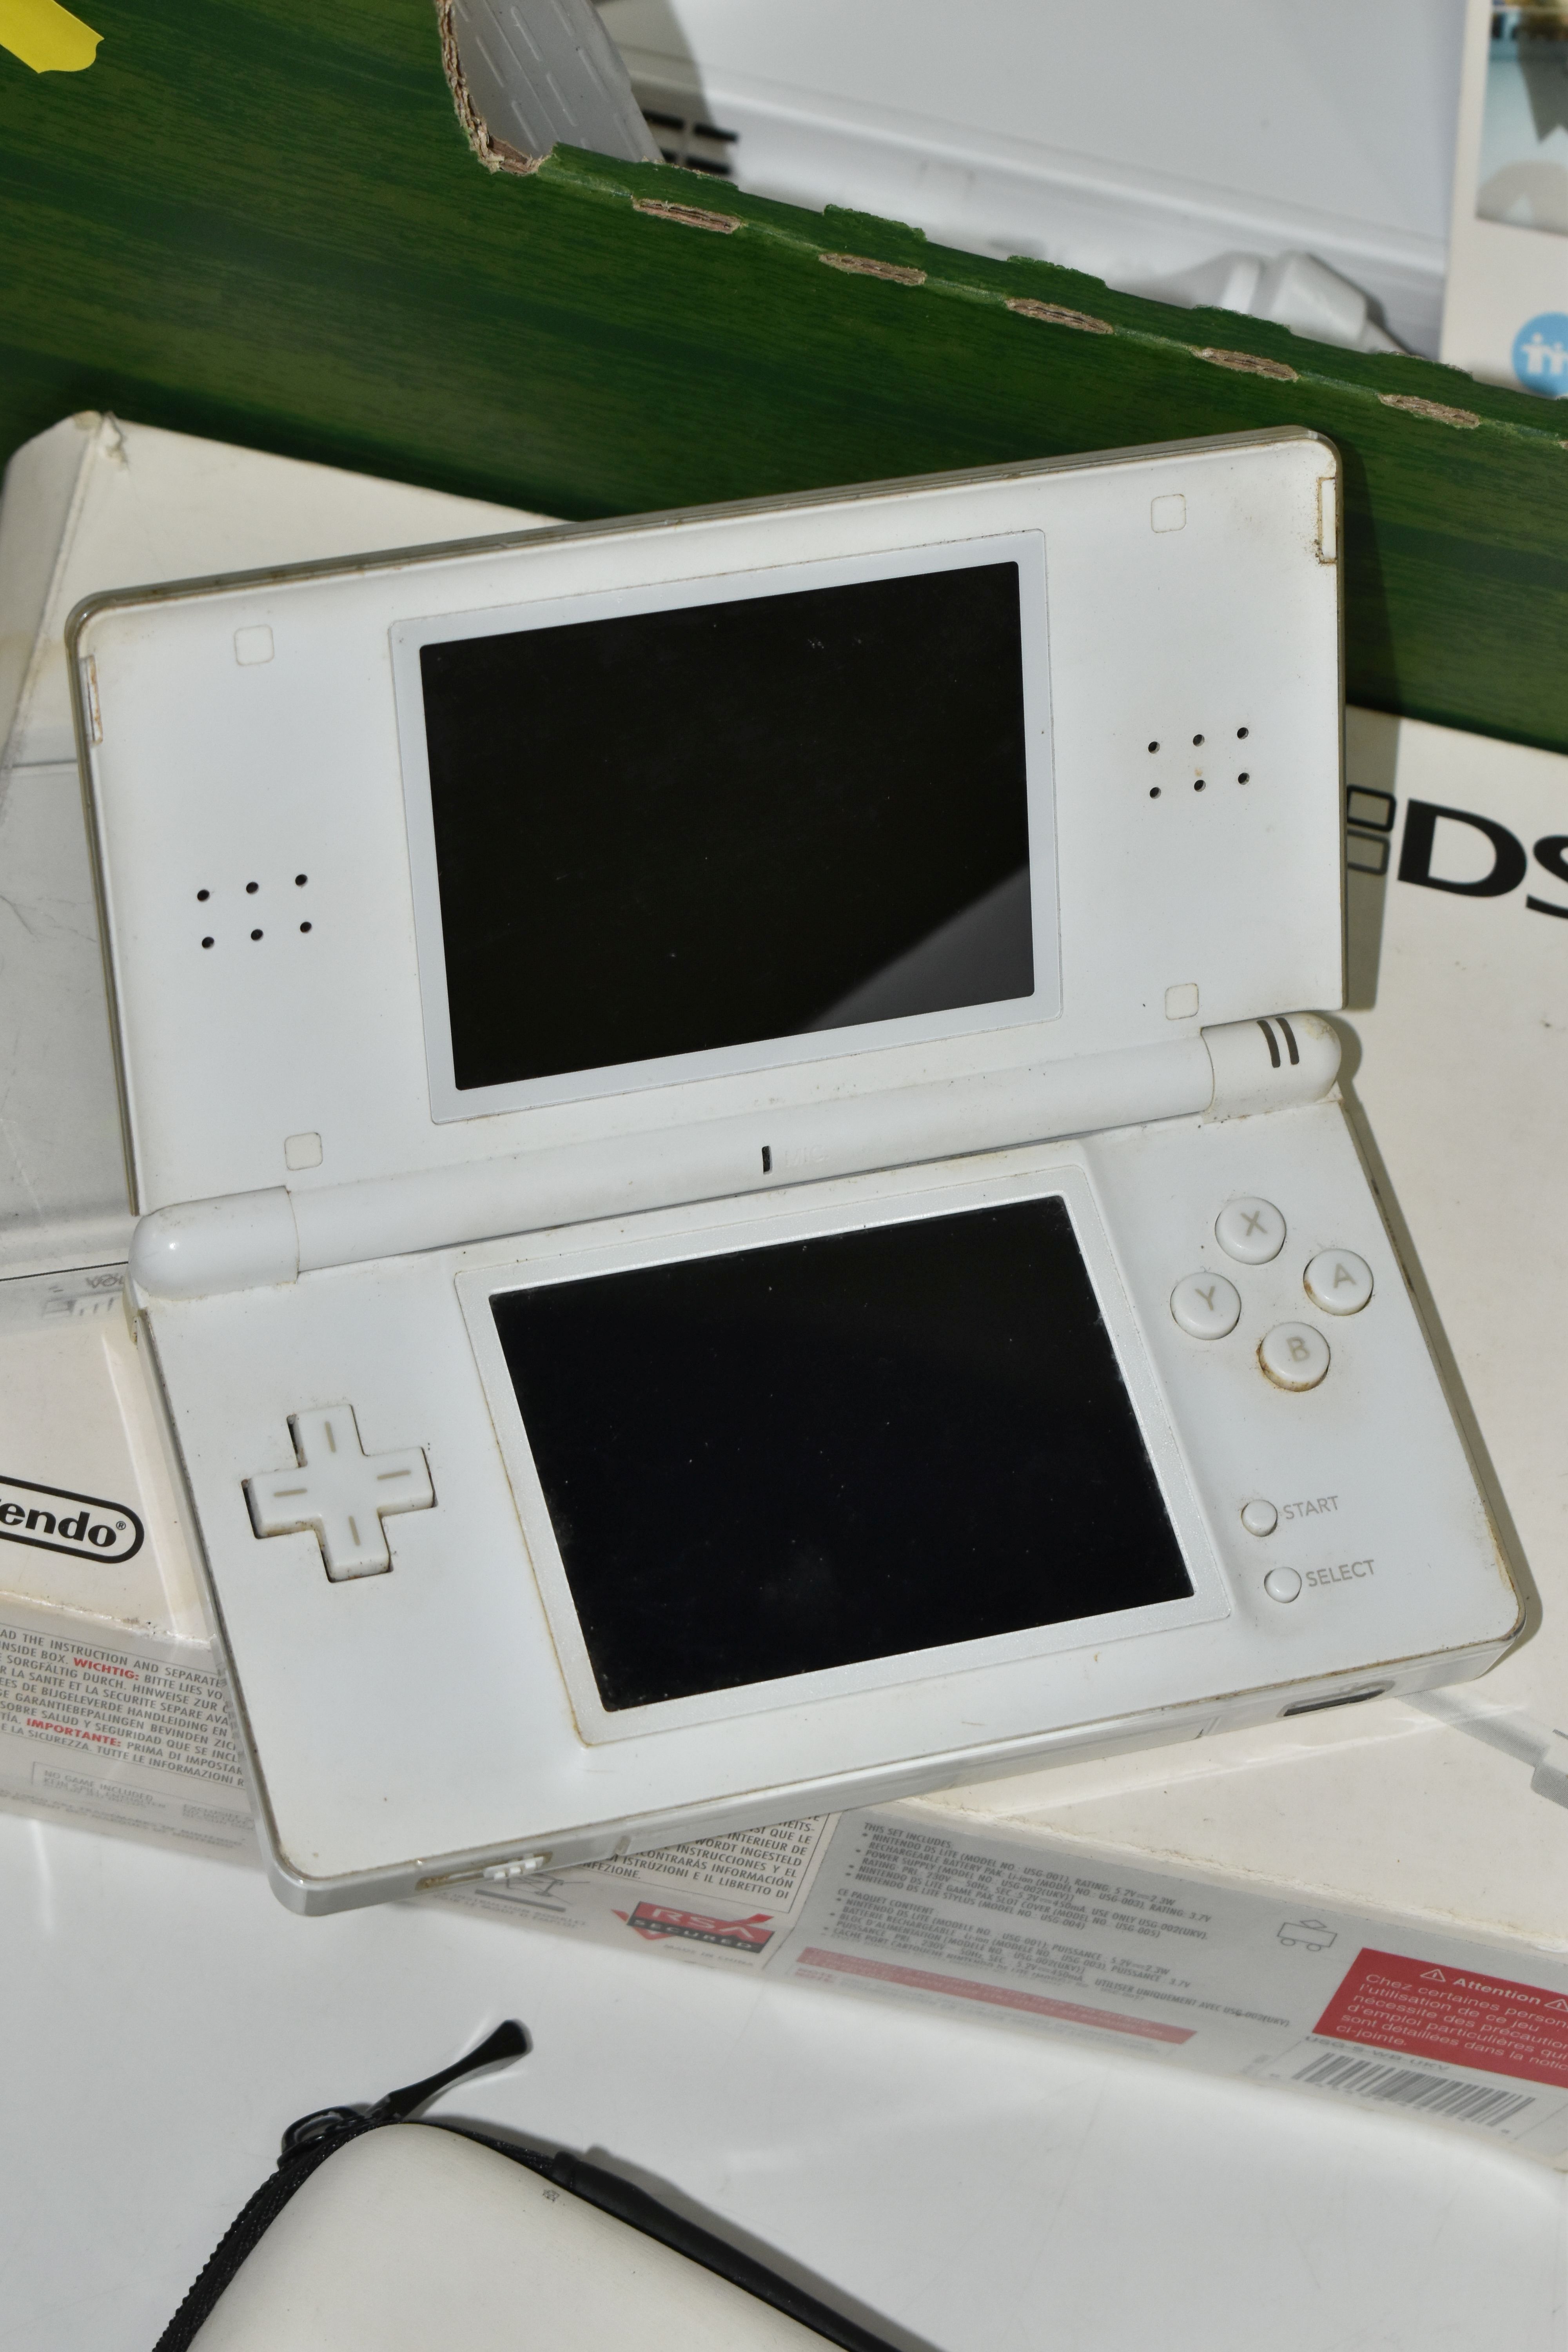 NINTENDO DS, NINTENDO WII, SONY PSP, GAMES, AND ACCESSORIES, games include Mario Kart Wii (Wii), Wii - Image 6 of 10